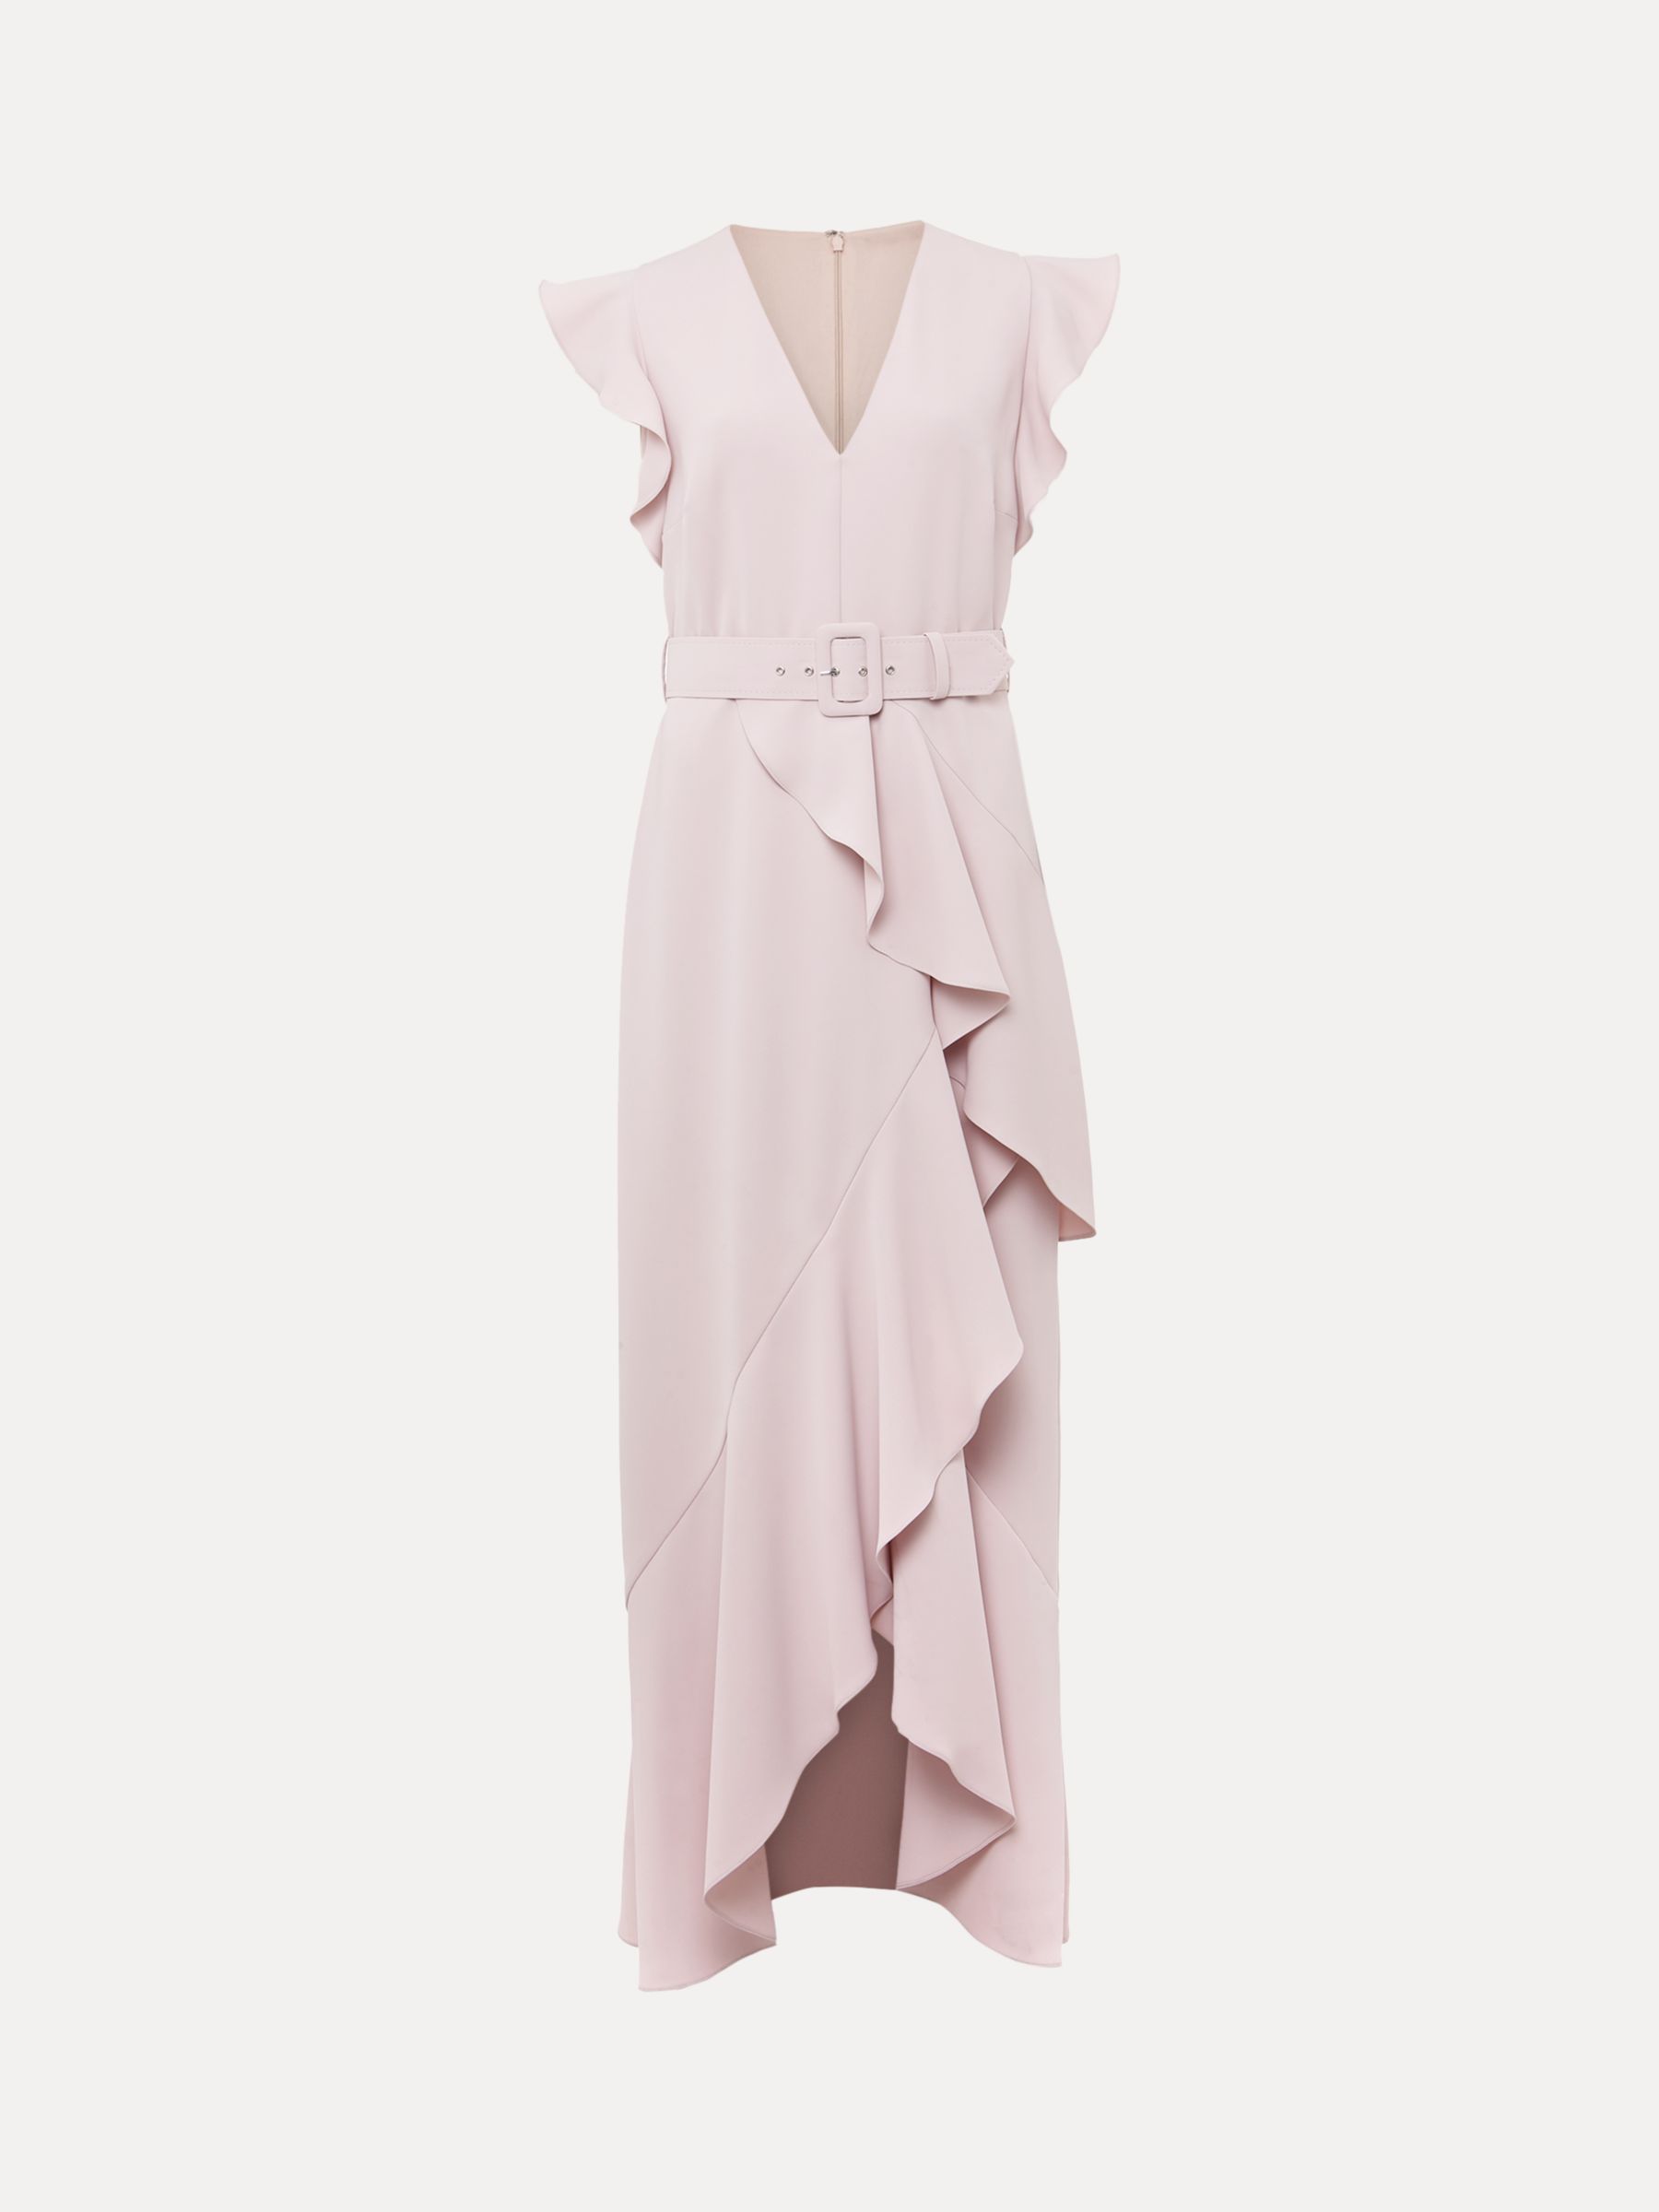 Phase Eight Phoebe Frill Belted Maxi Dress, Powder Pink, 6